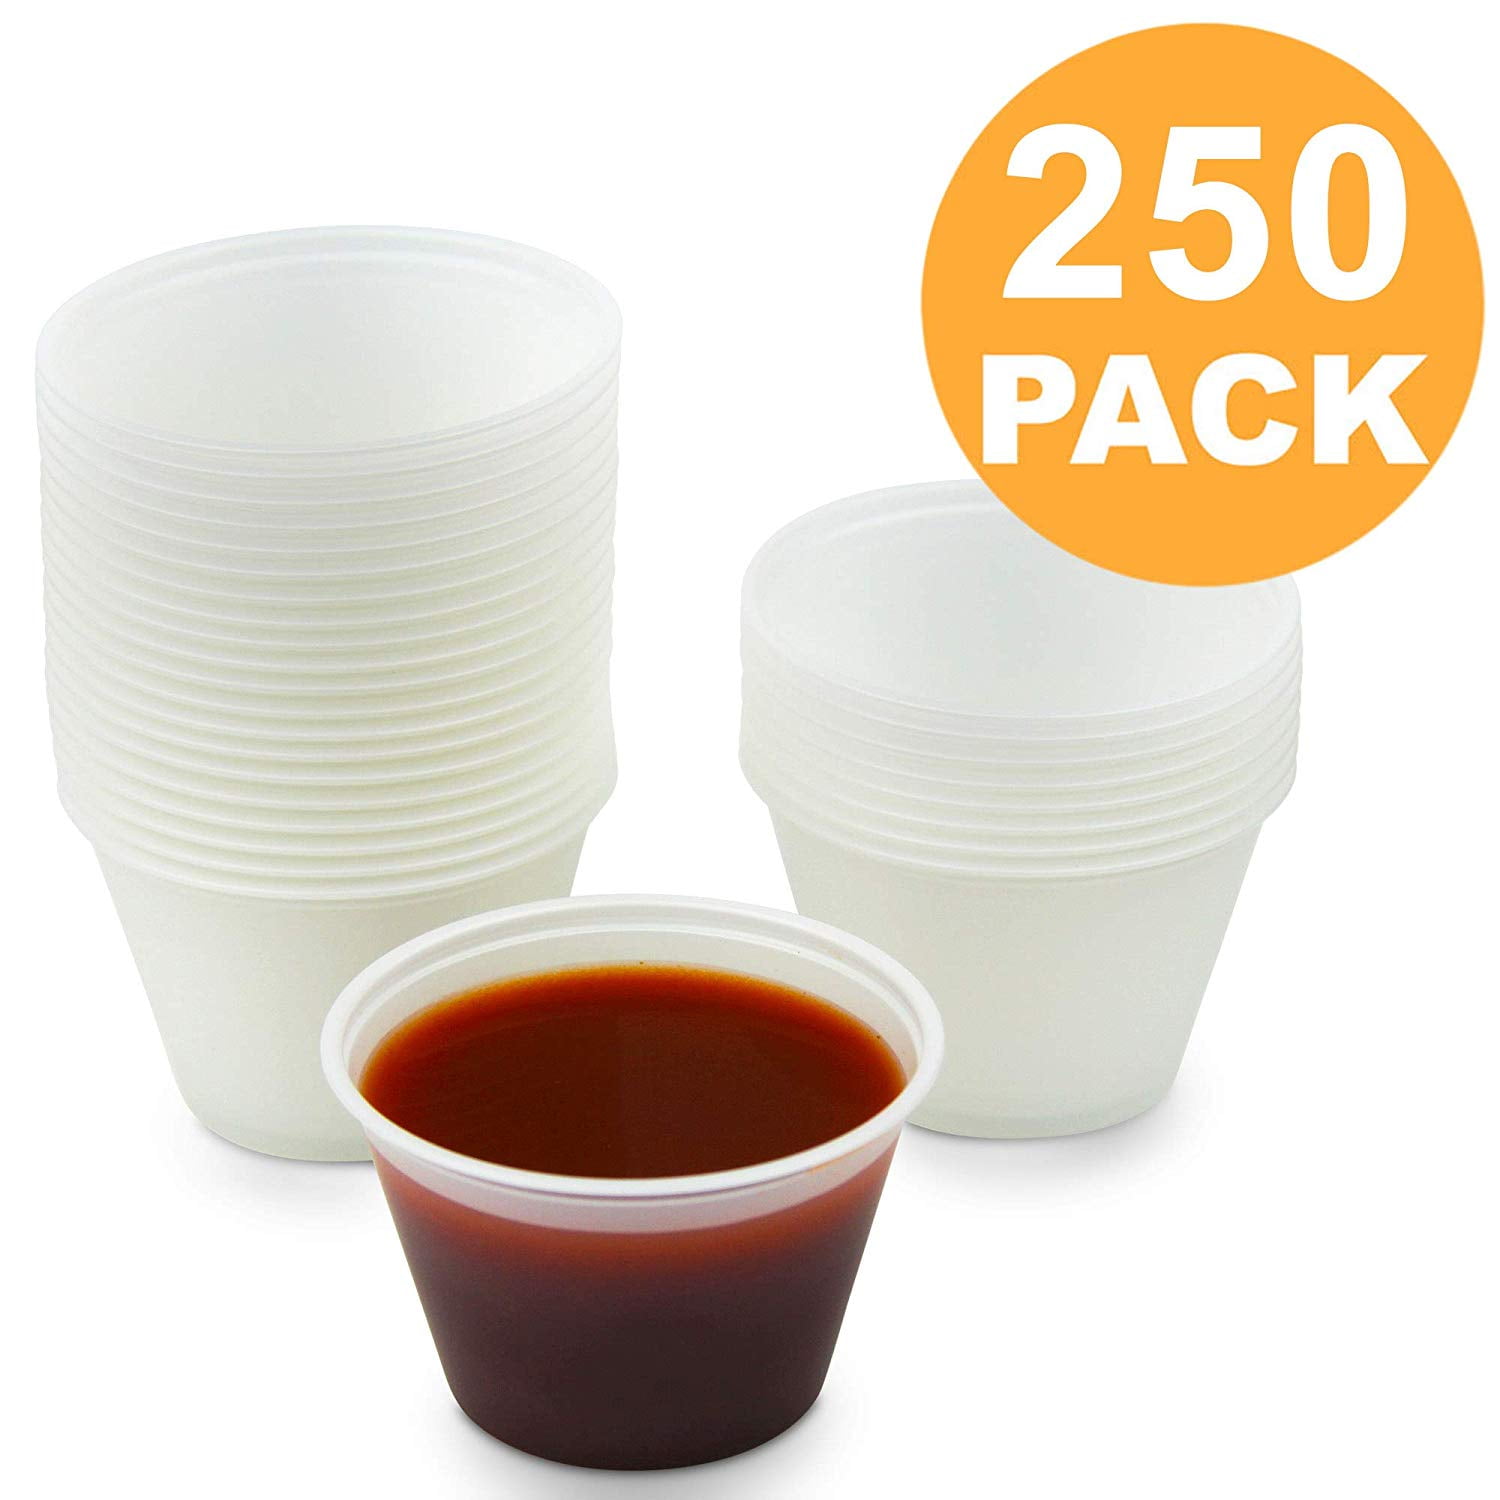 SEALED PACK PORTION CUPS 1 oz SOLO PLASTIC SAUCES/SHOTS/MEDS 125 CUPS ONLY 